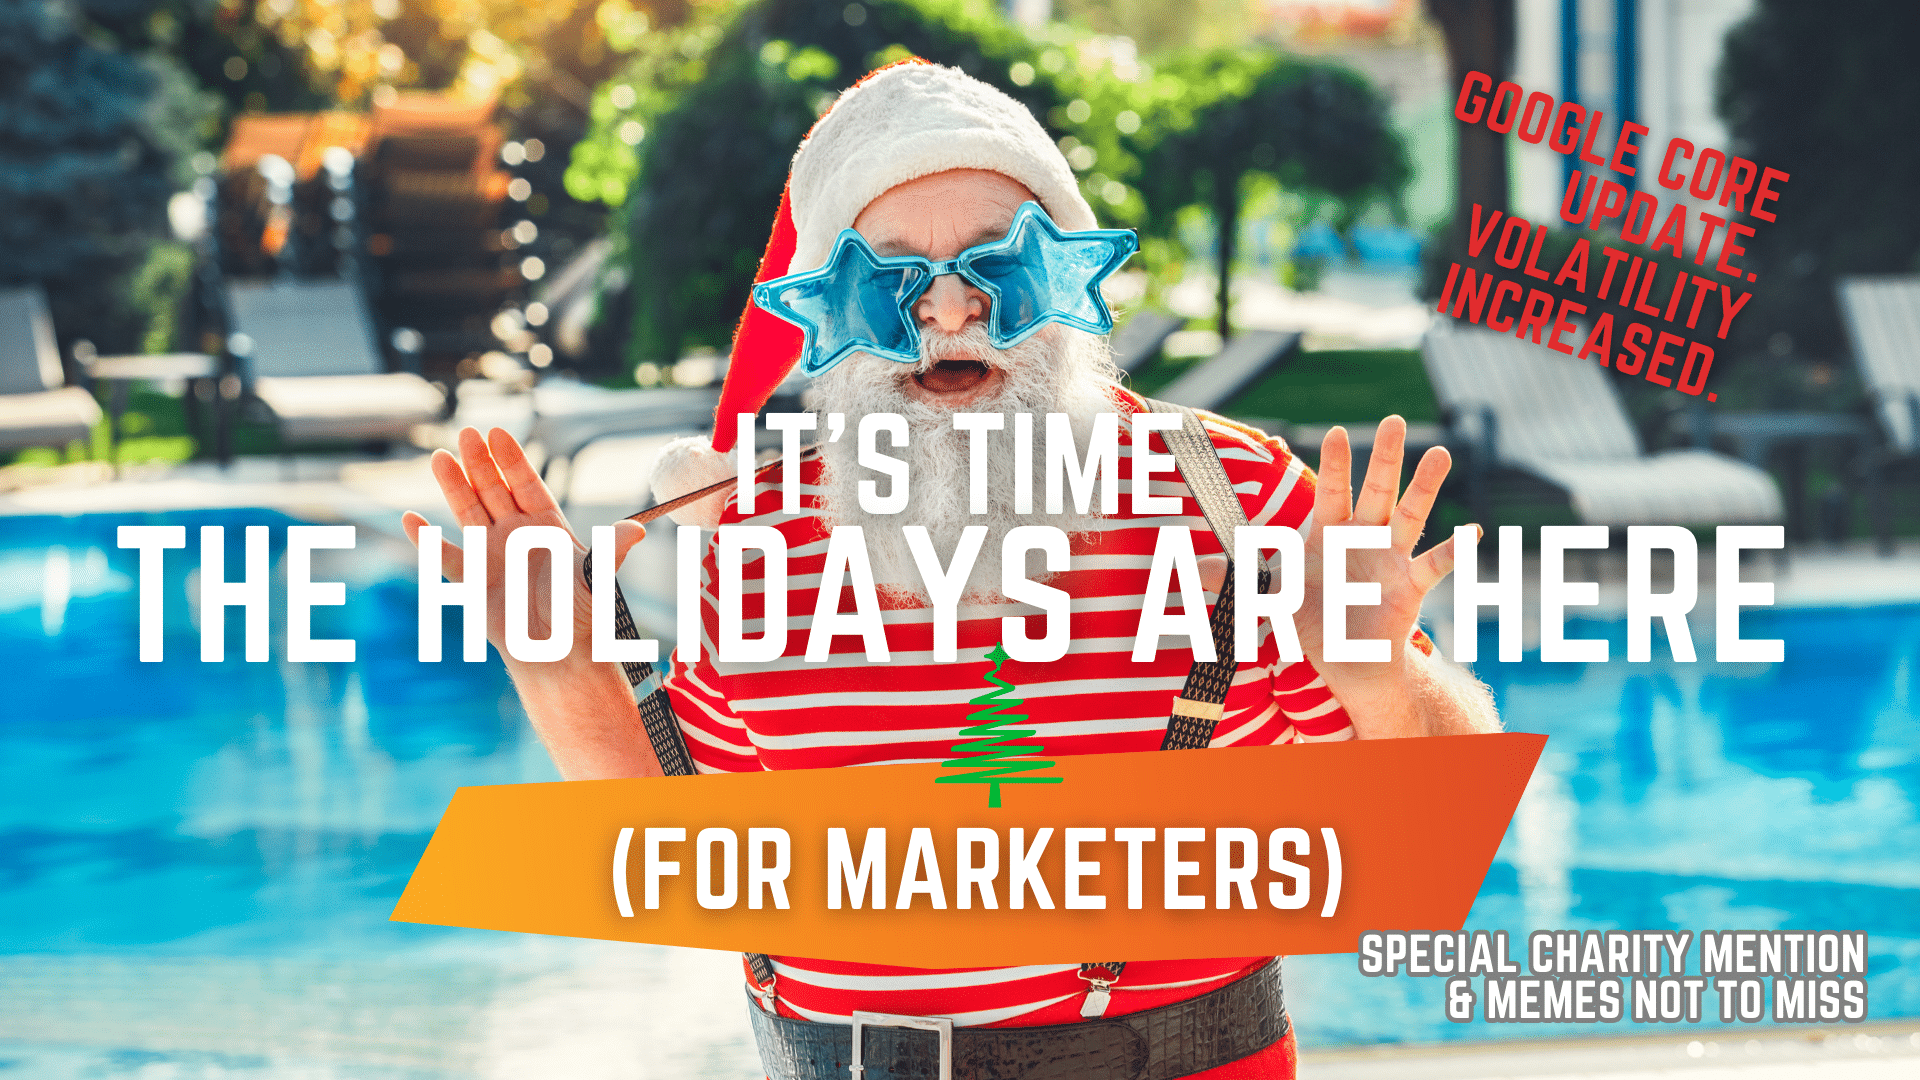 The Holidays Are Here for Marketers at least. Image of Santa by the pool in summer.